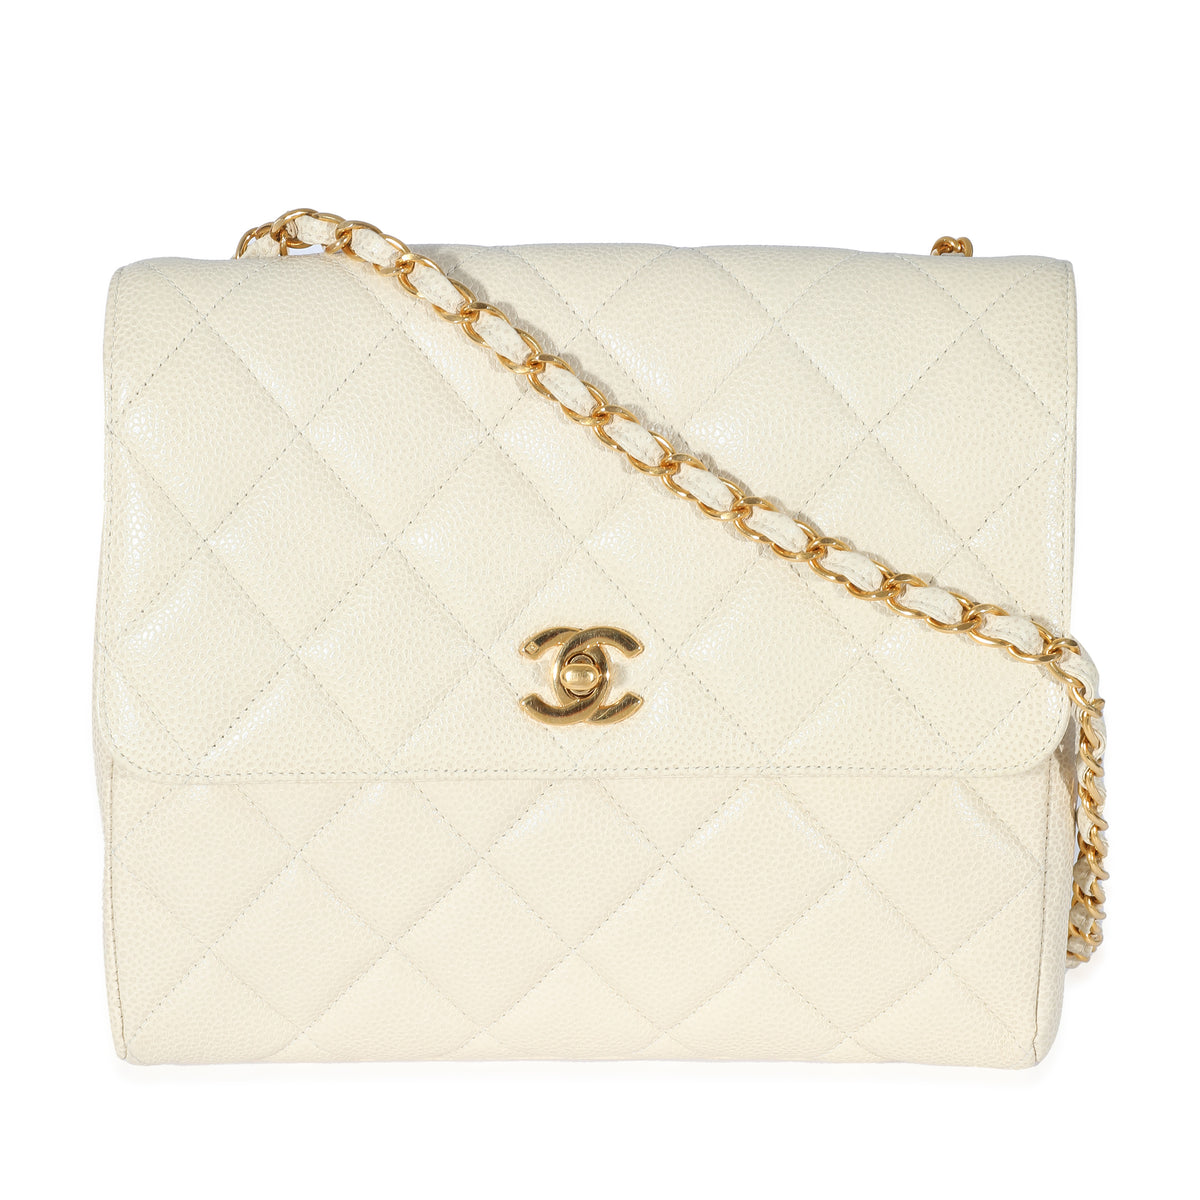 Chanel Black Quilted Lambskin Pearl Logo Strap Small Flap Bag, myGemma